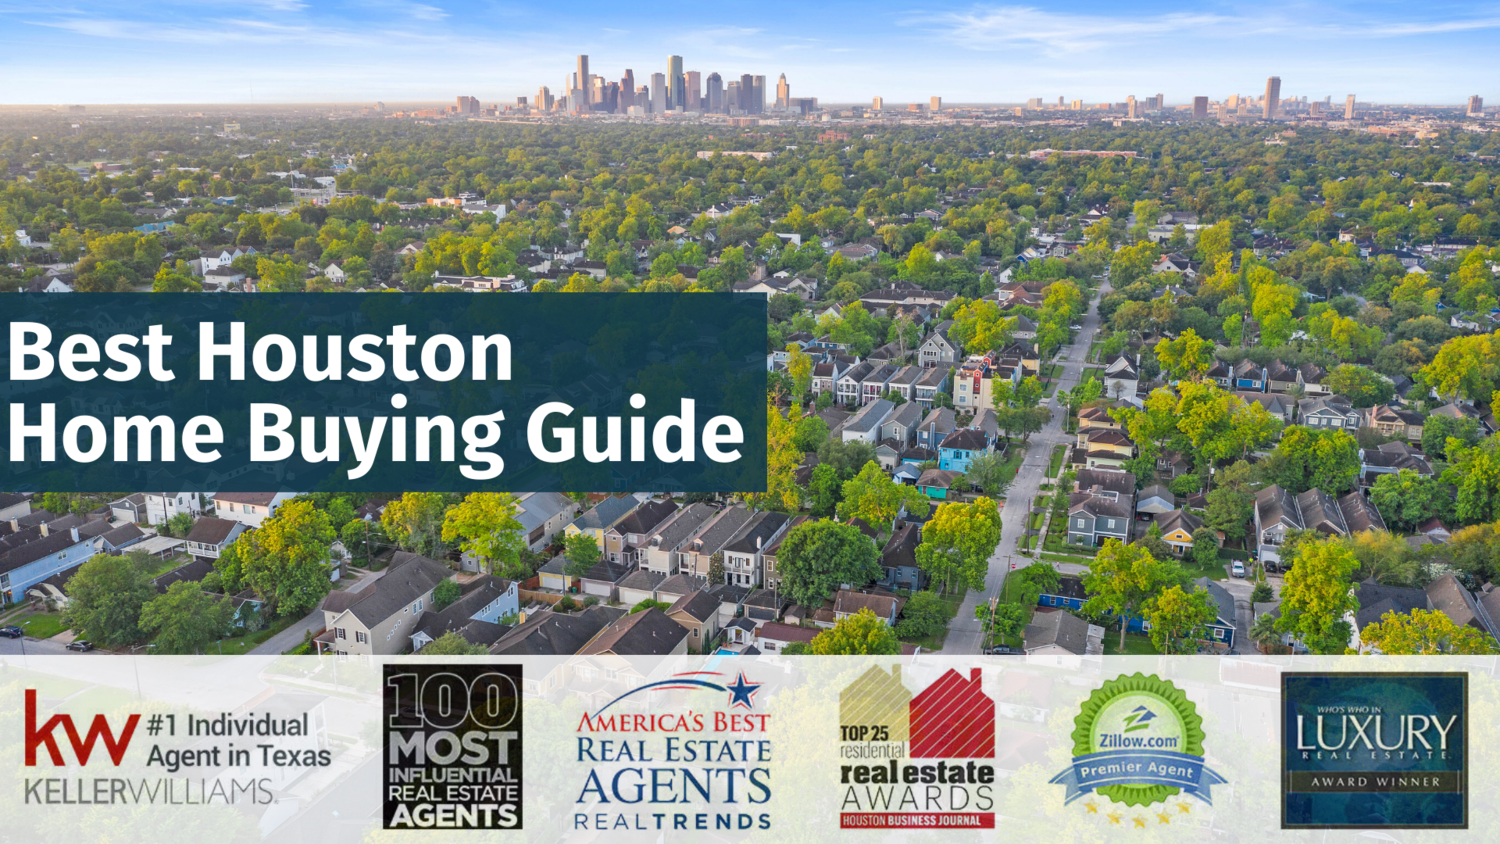 Looking To Buy A Home In Houston?